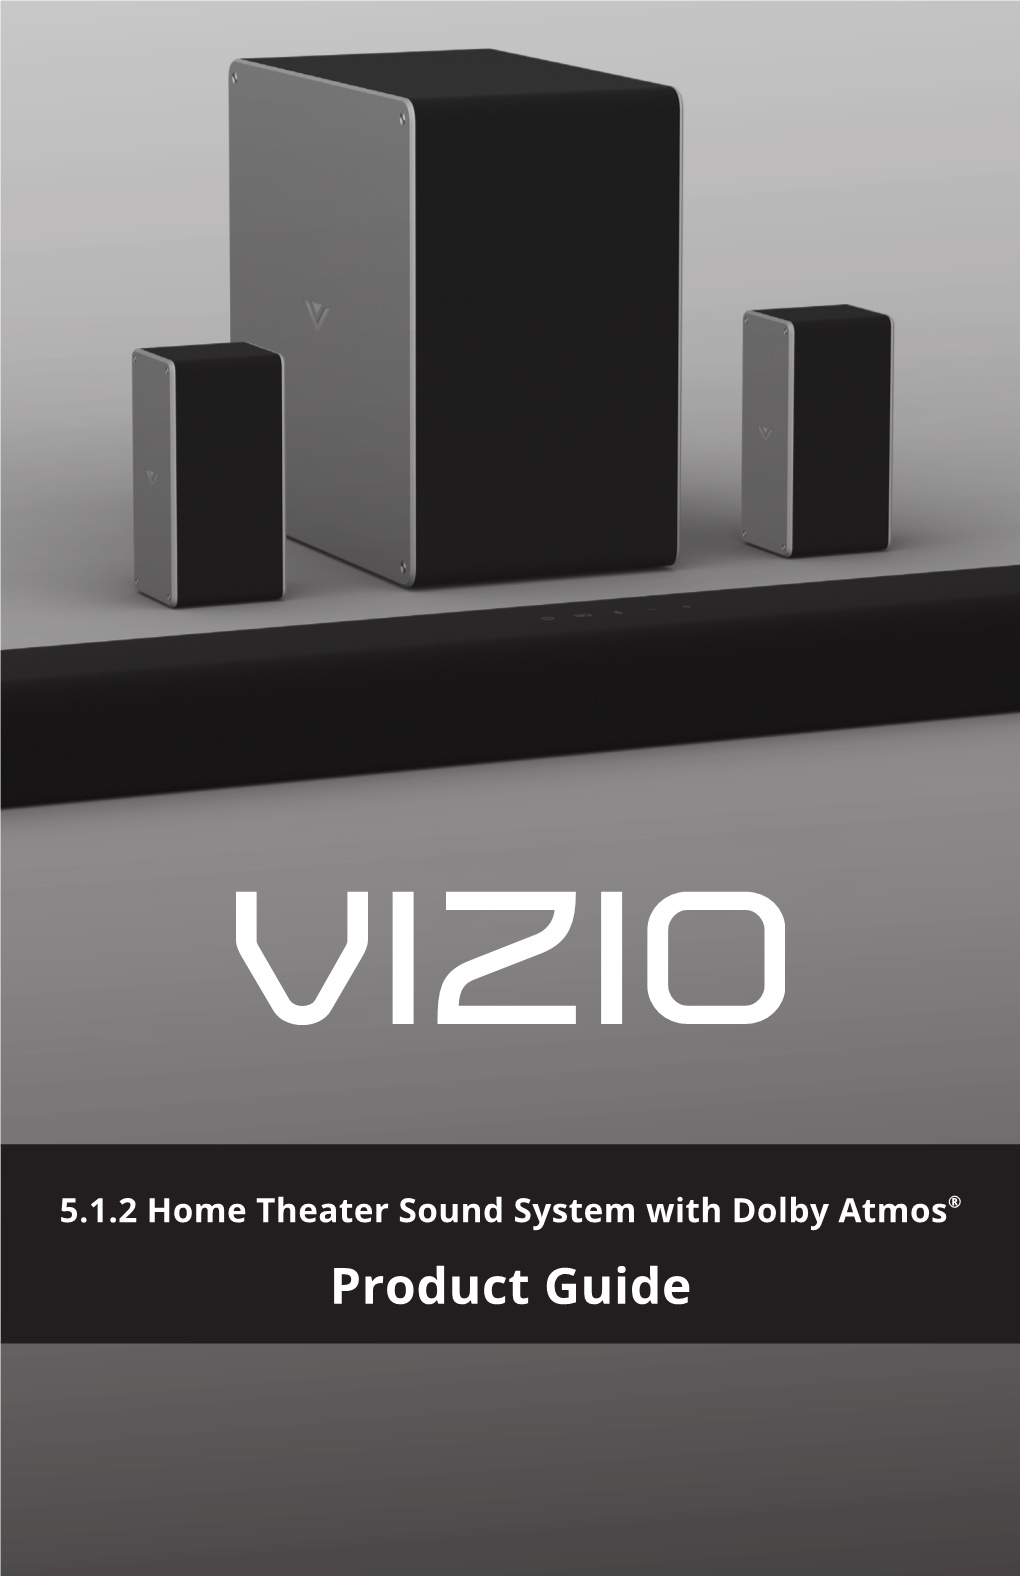 Product Guide VIZIO Is Excited to Introduce You to Our 36” 5.1.2 Home Theater Sound System with Dolby Atmos®